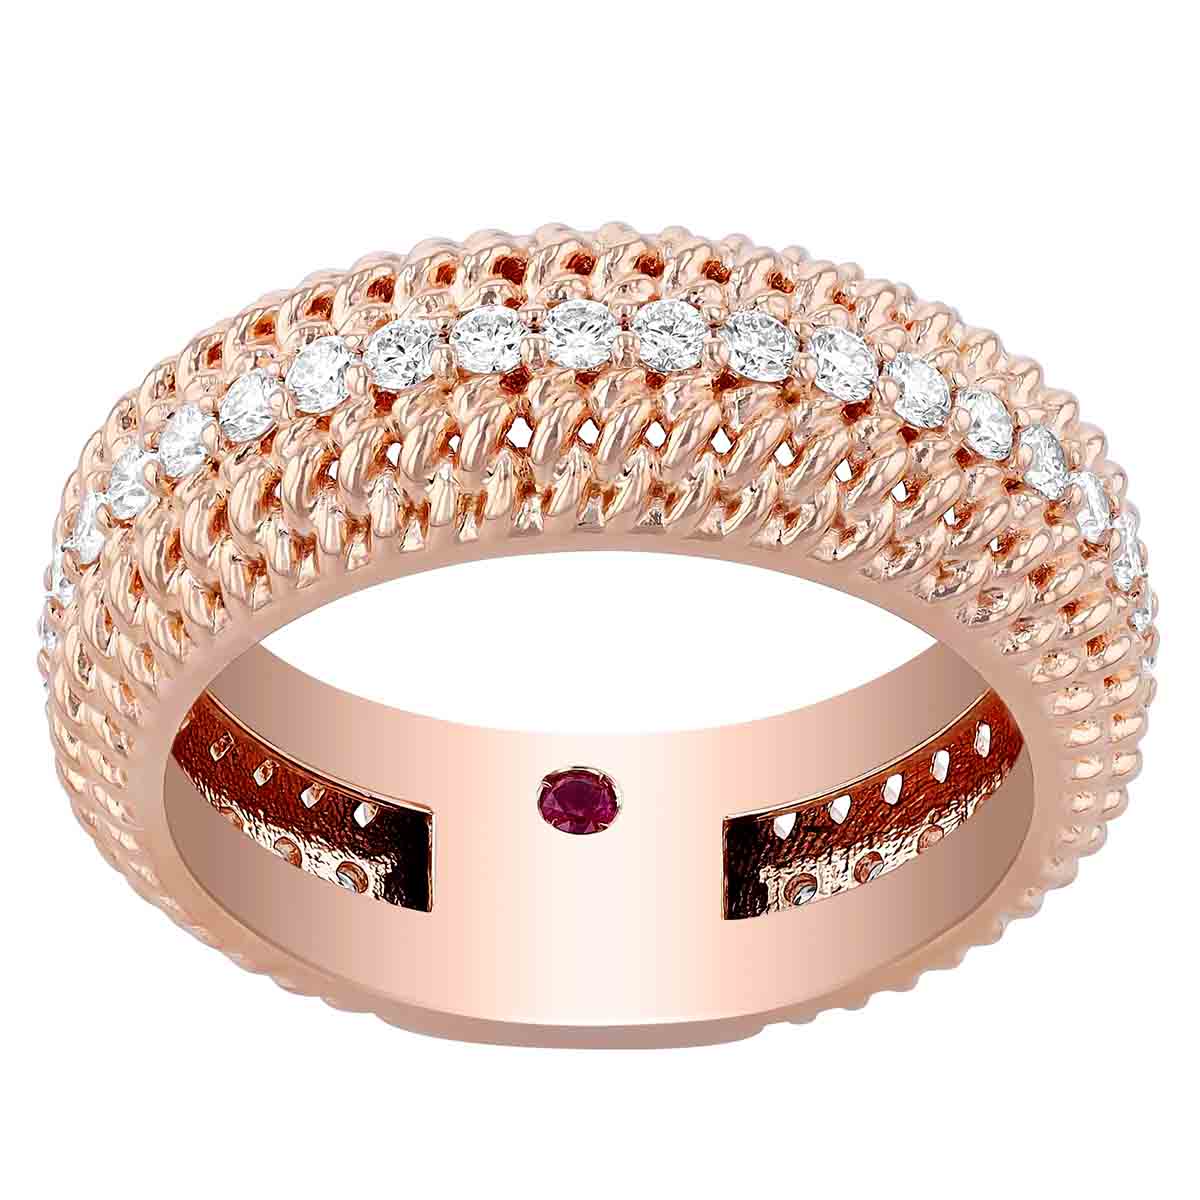 Roberto Coin Opera Diamond Textured Ring in Rose Gold | 7772779AX65X ...